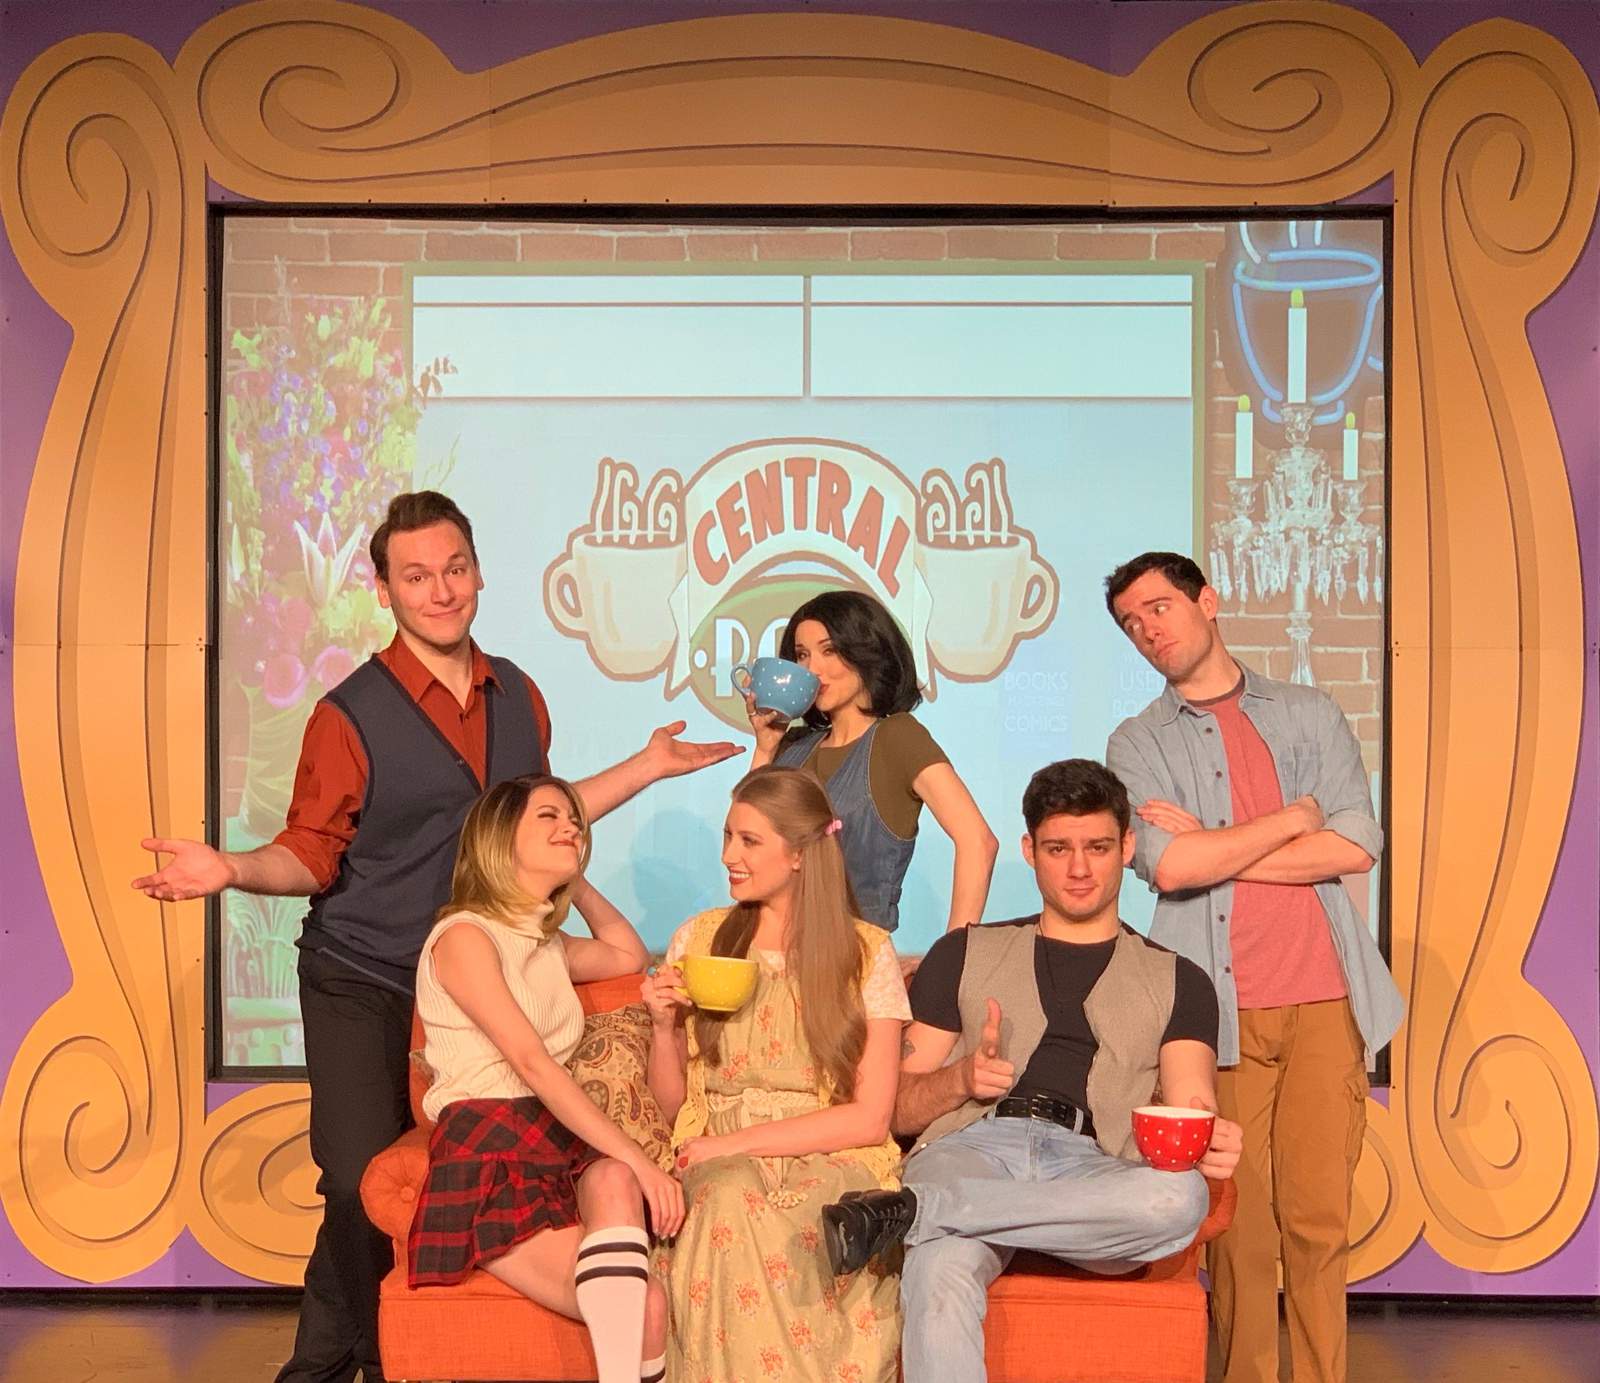 See Rachel, Ross, Chandler, Monica, Joey and Phoebe at the Tobin Center for ‘Friends’ parody